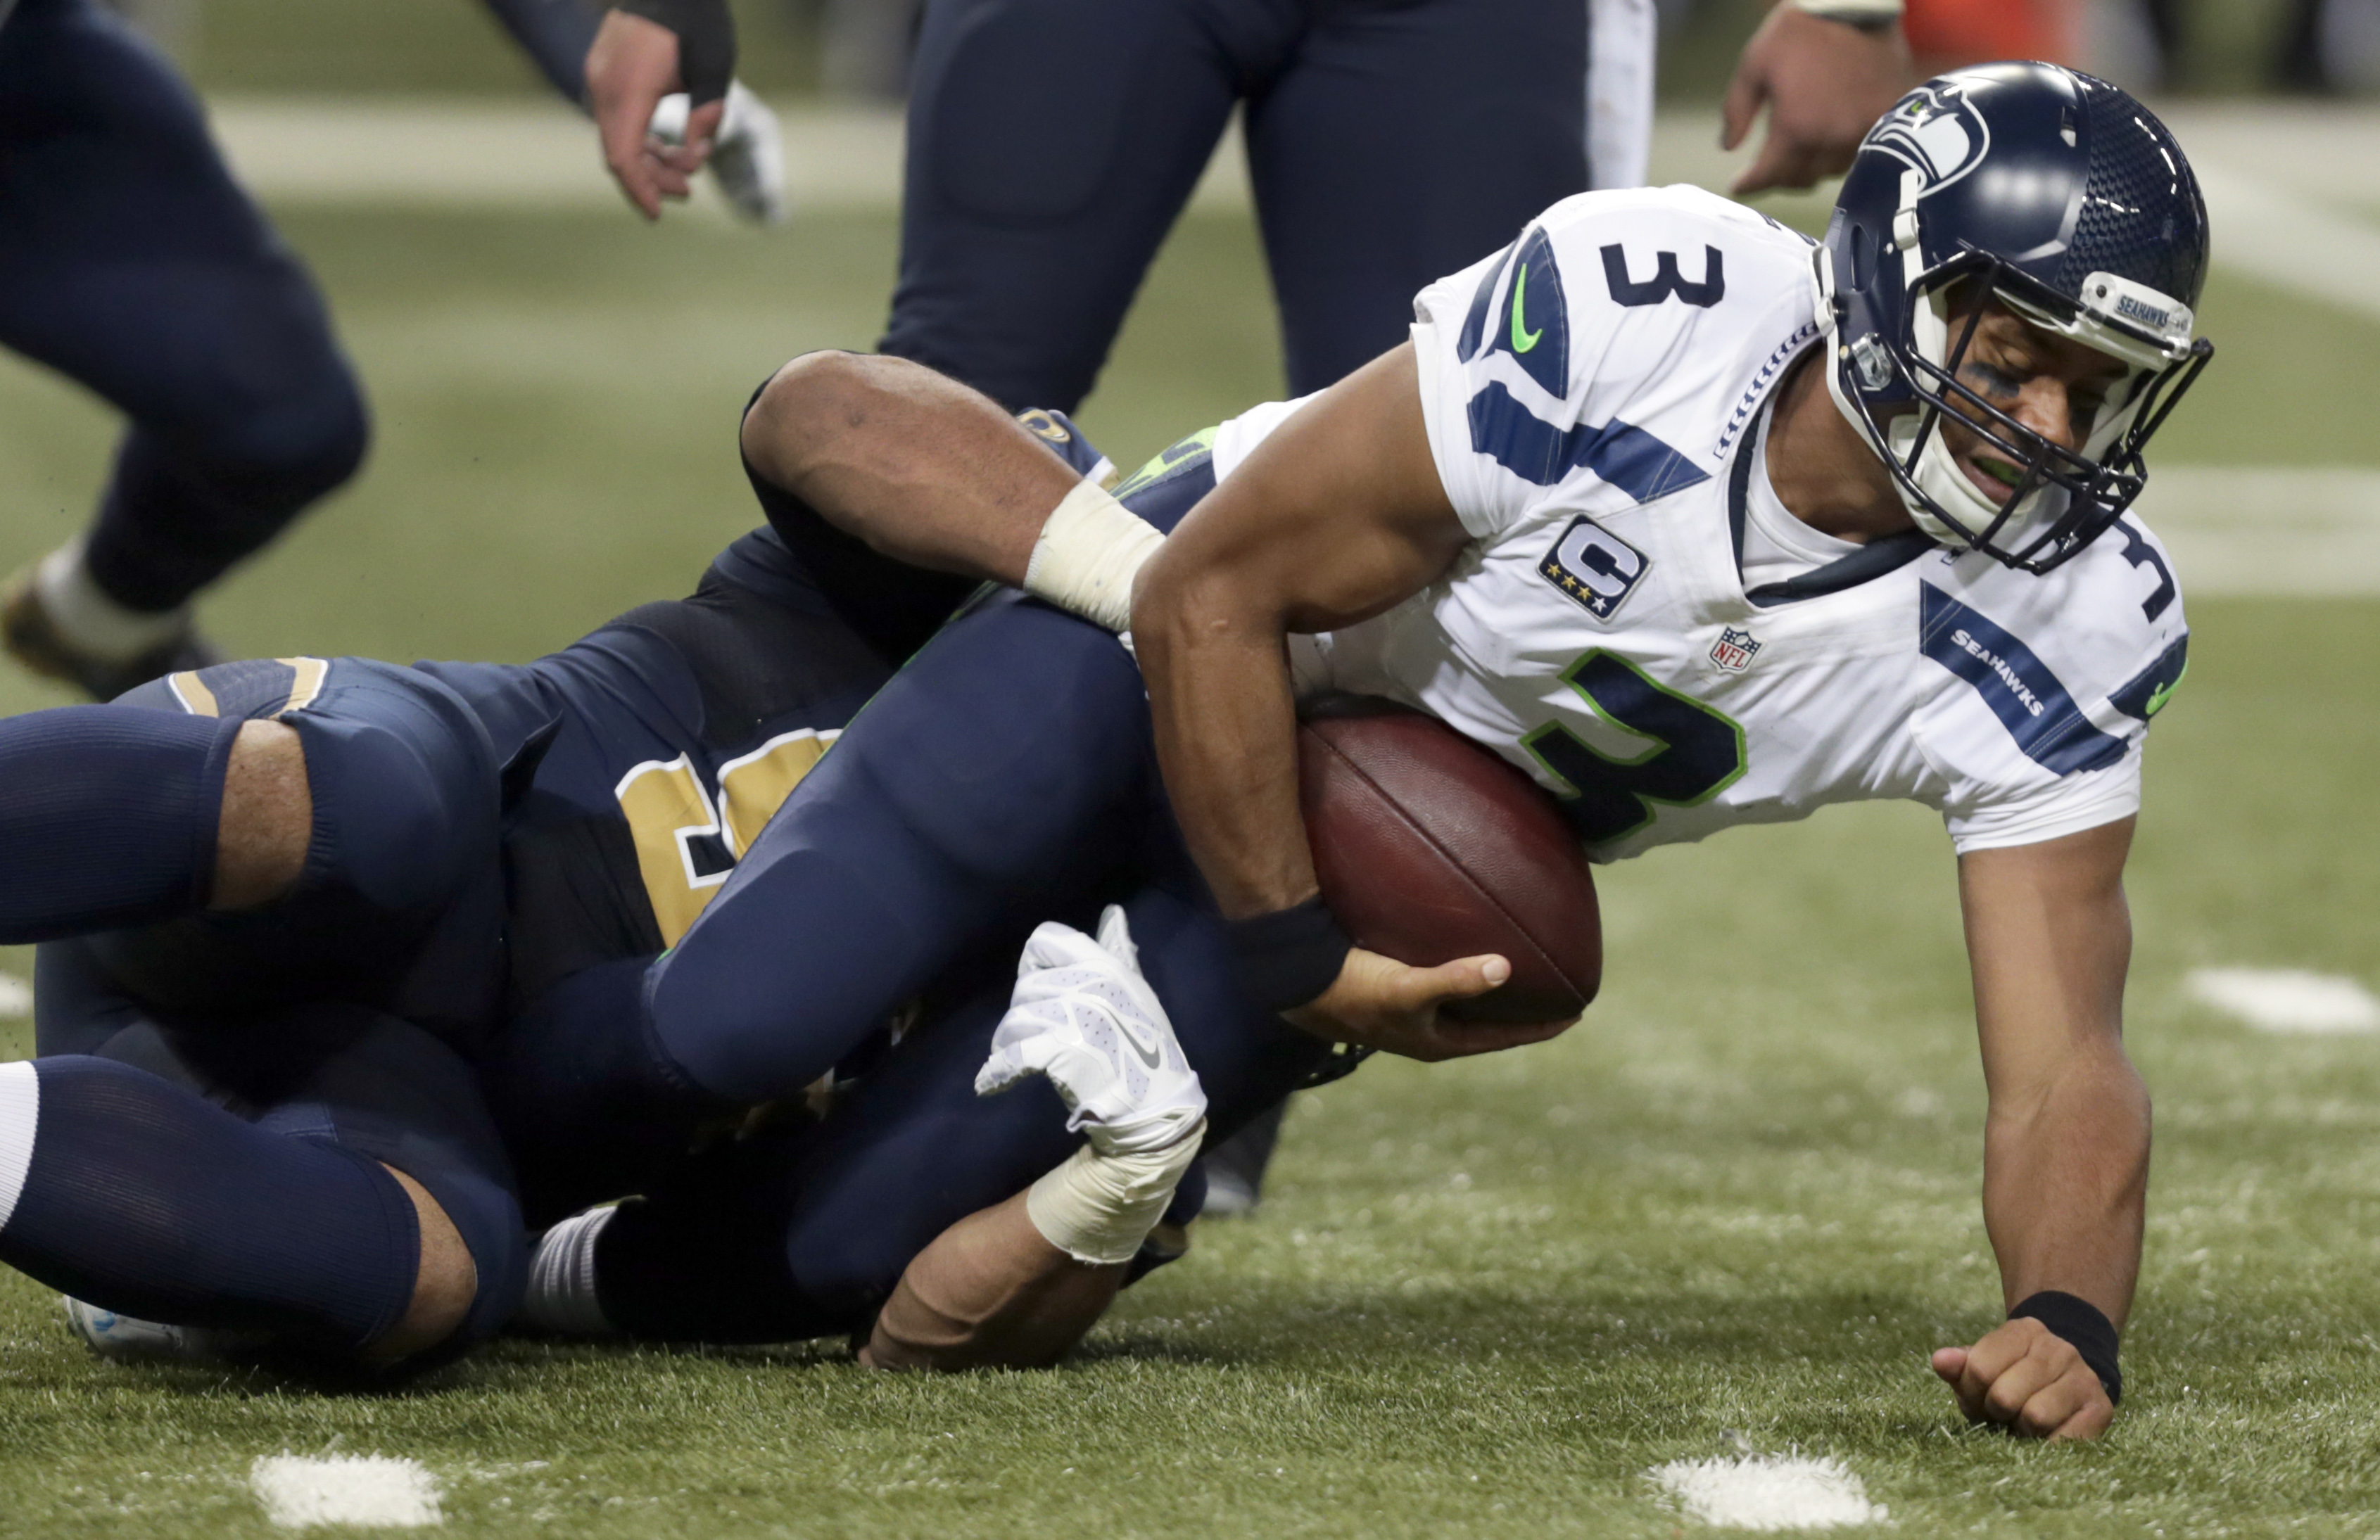 Seattle Seahawks quarterback Russell Wilson, right, is sacked for a 4-yard loss by St. Louis Rams defensive tackle Aaron Donald during the third quarter of an NFL football game Sunday, Sept. 13, 2015, in St. Louis. (AP Photo/Tom Gannam)